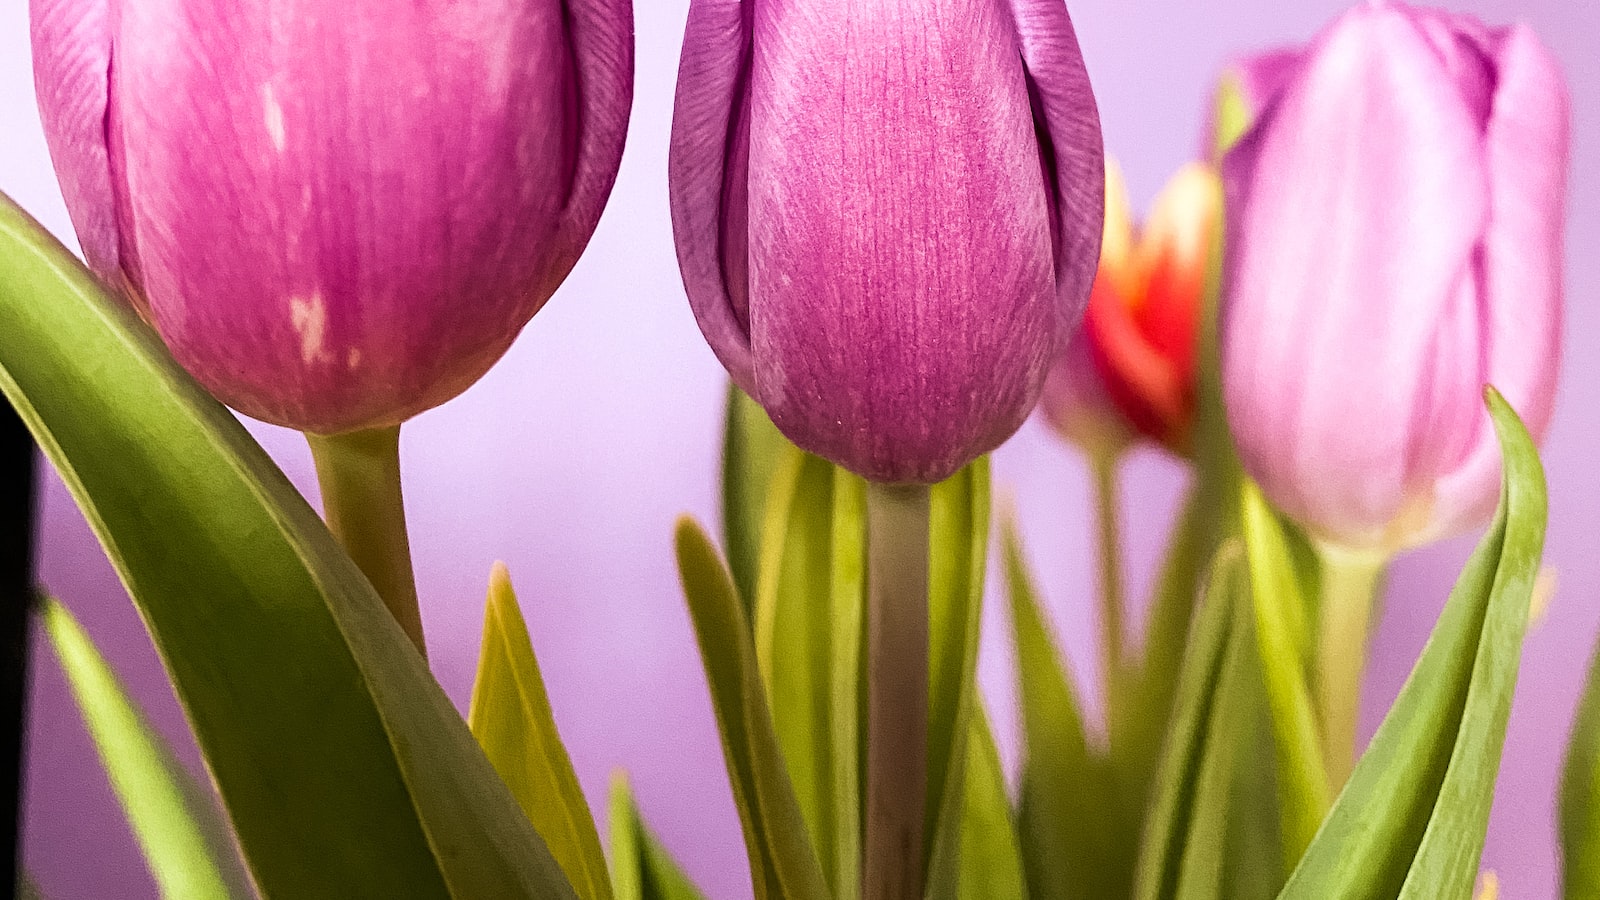 Planning for a Vibrant Spring: When to Plant Tulips in Nebraska